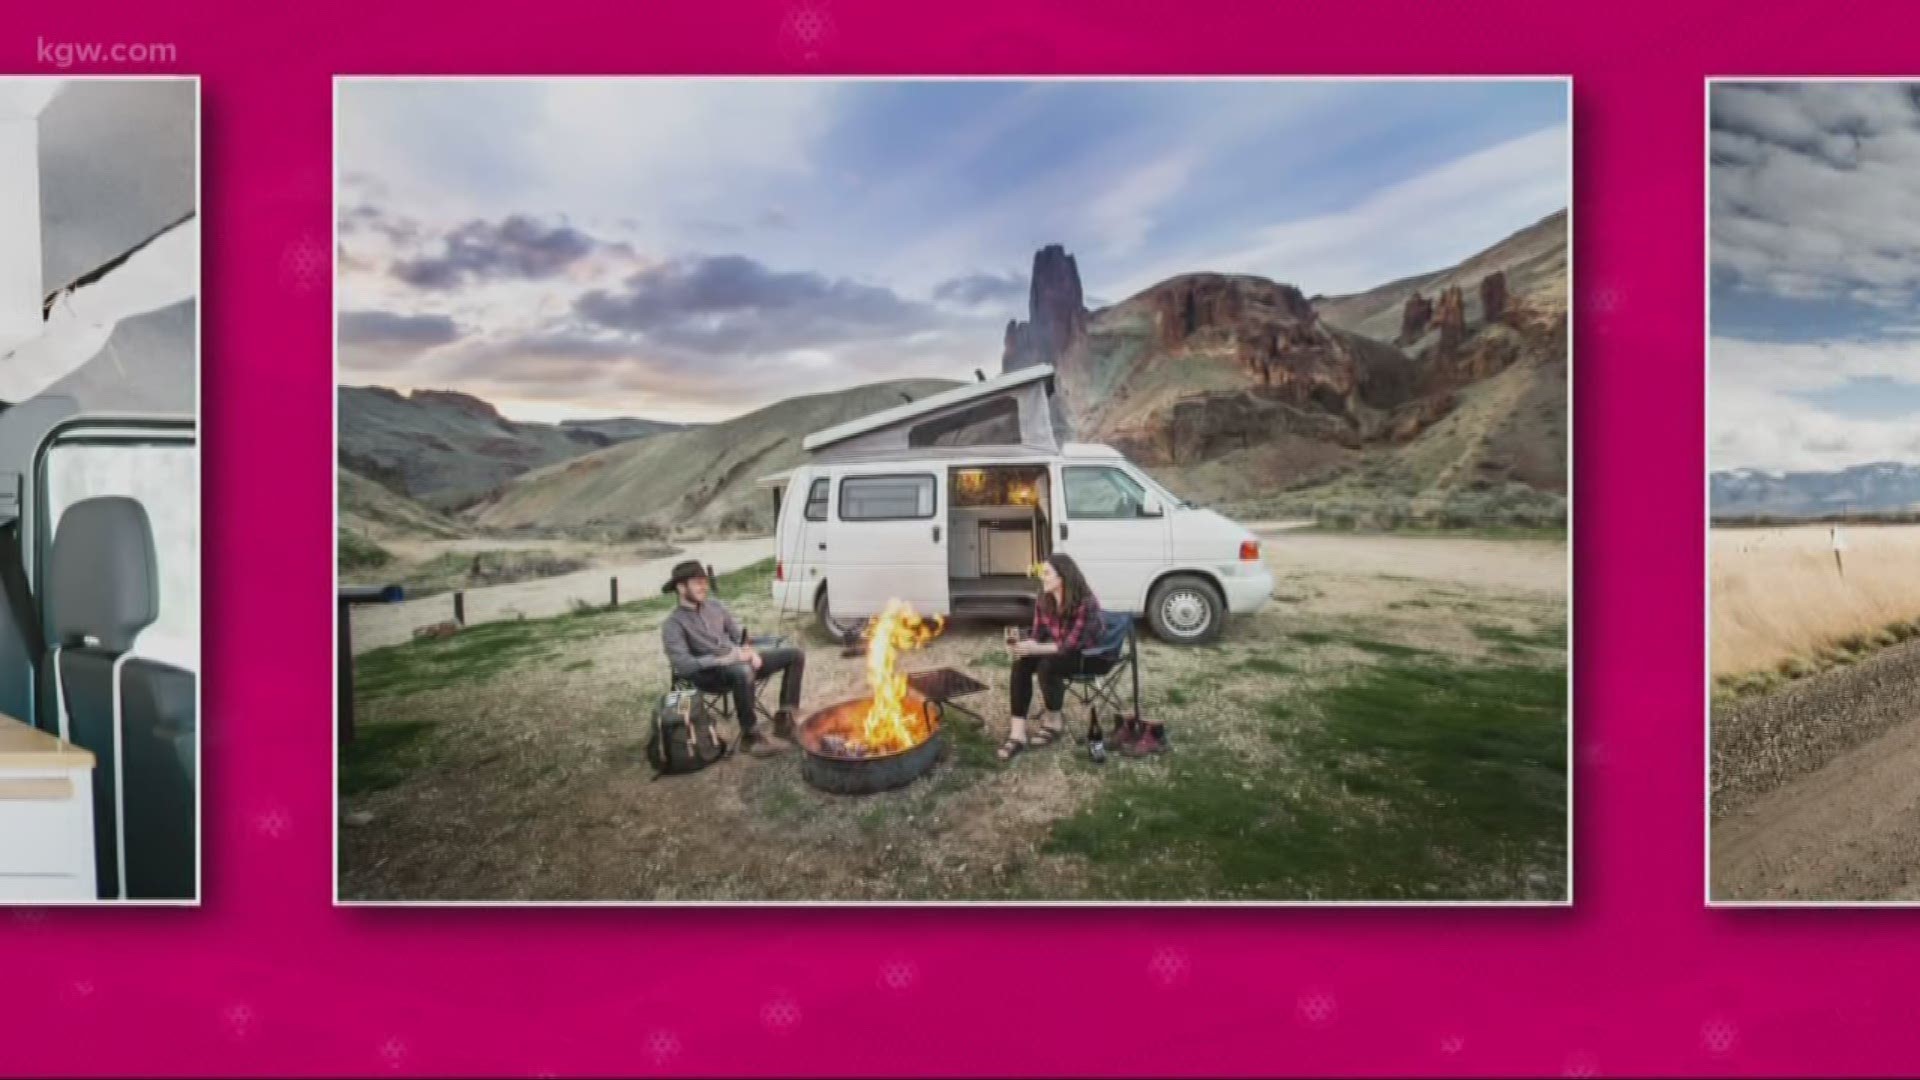 GoCamp is the Airbnb of camper vans. They'll help you prep for your next road trip.
gocampcampervans.com
#TonightwithCassidy